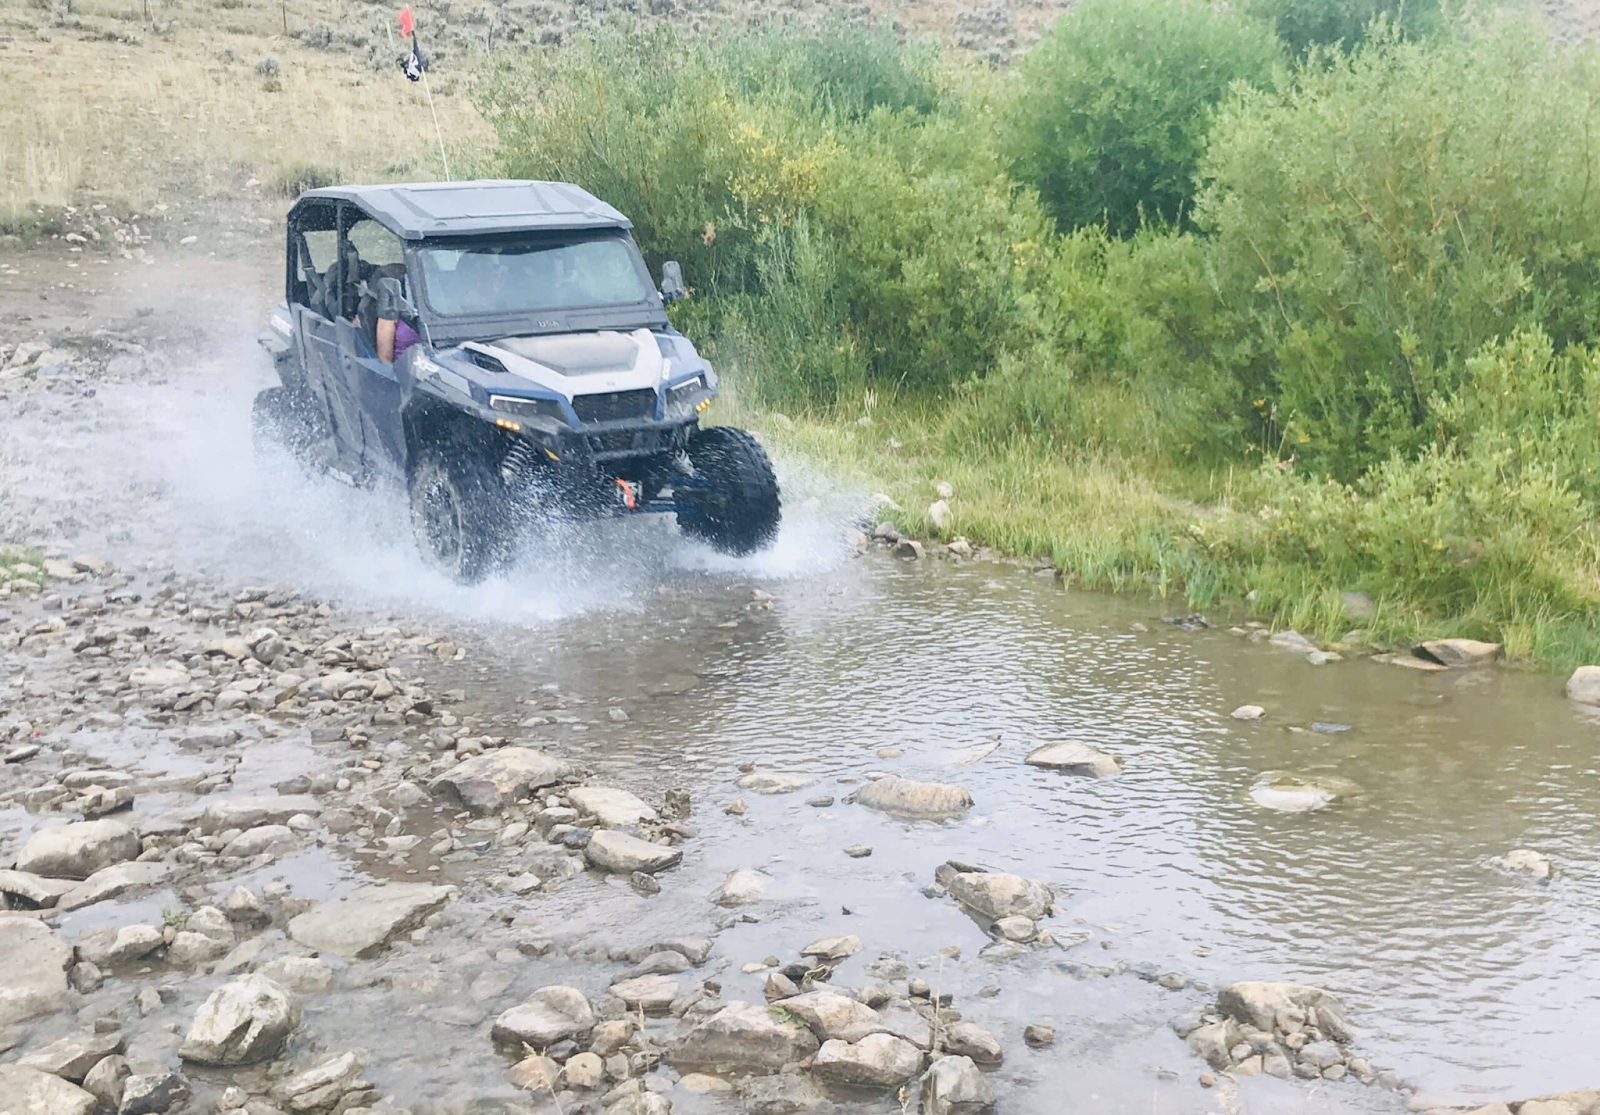 An OHV riding through wet terrain with force